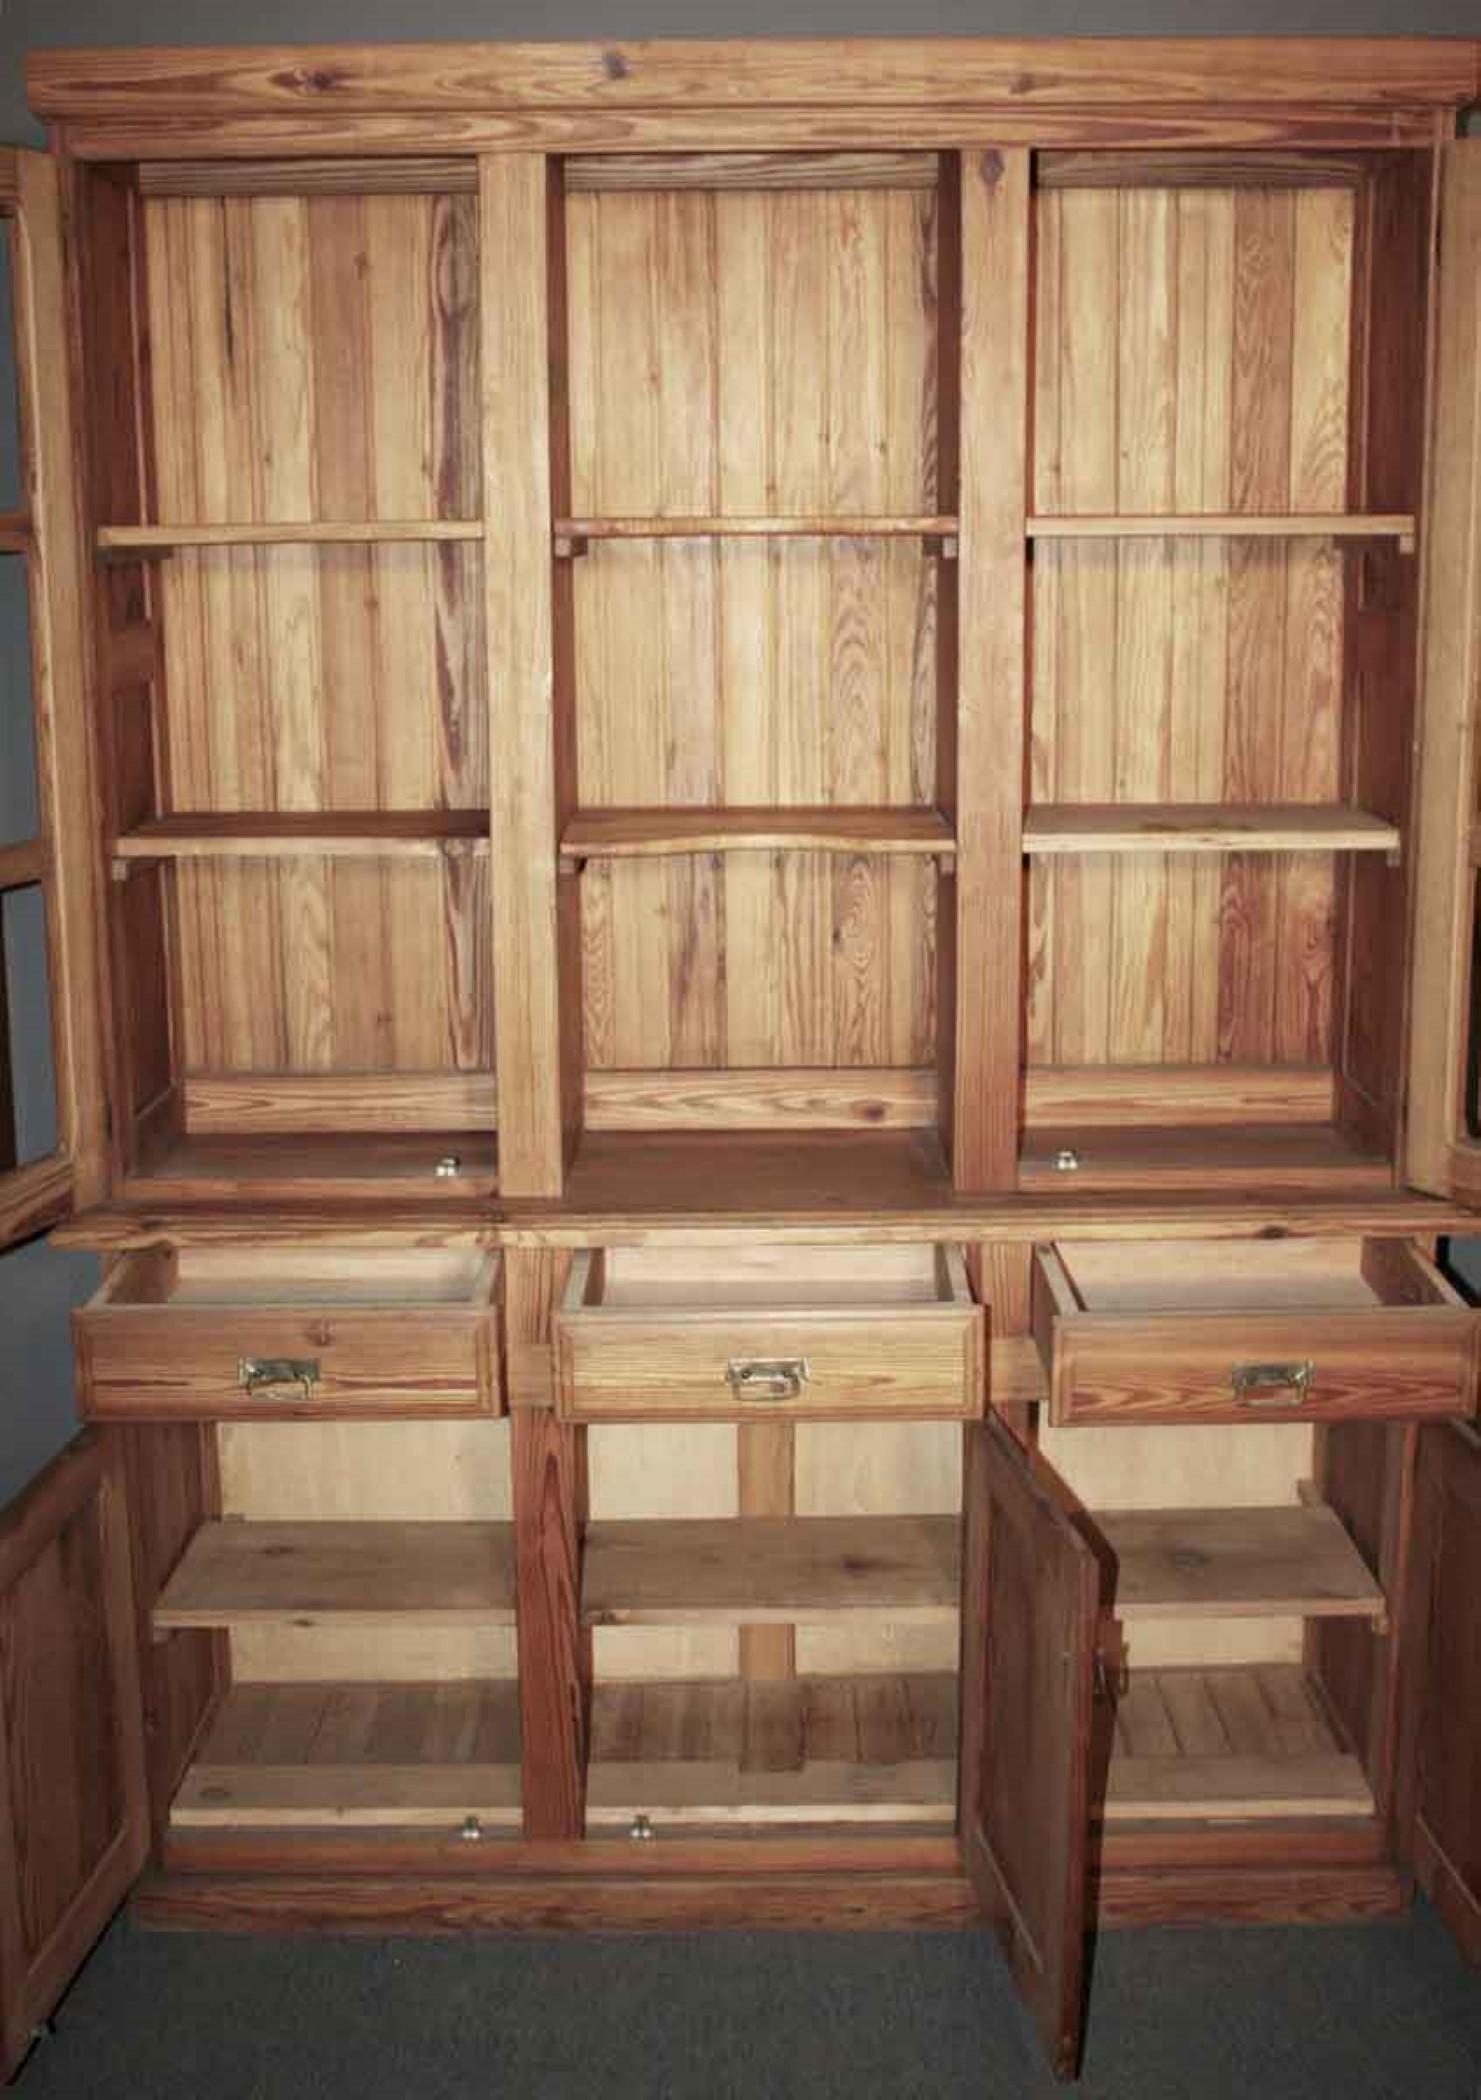 2002 handmade heart pine hutch. Price includes glass for doors and shelves for the center section. Never painted.